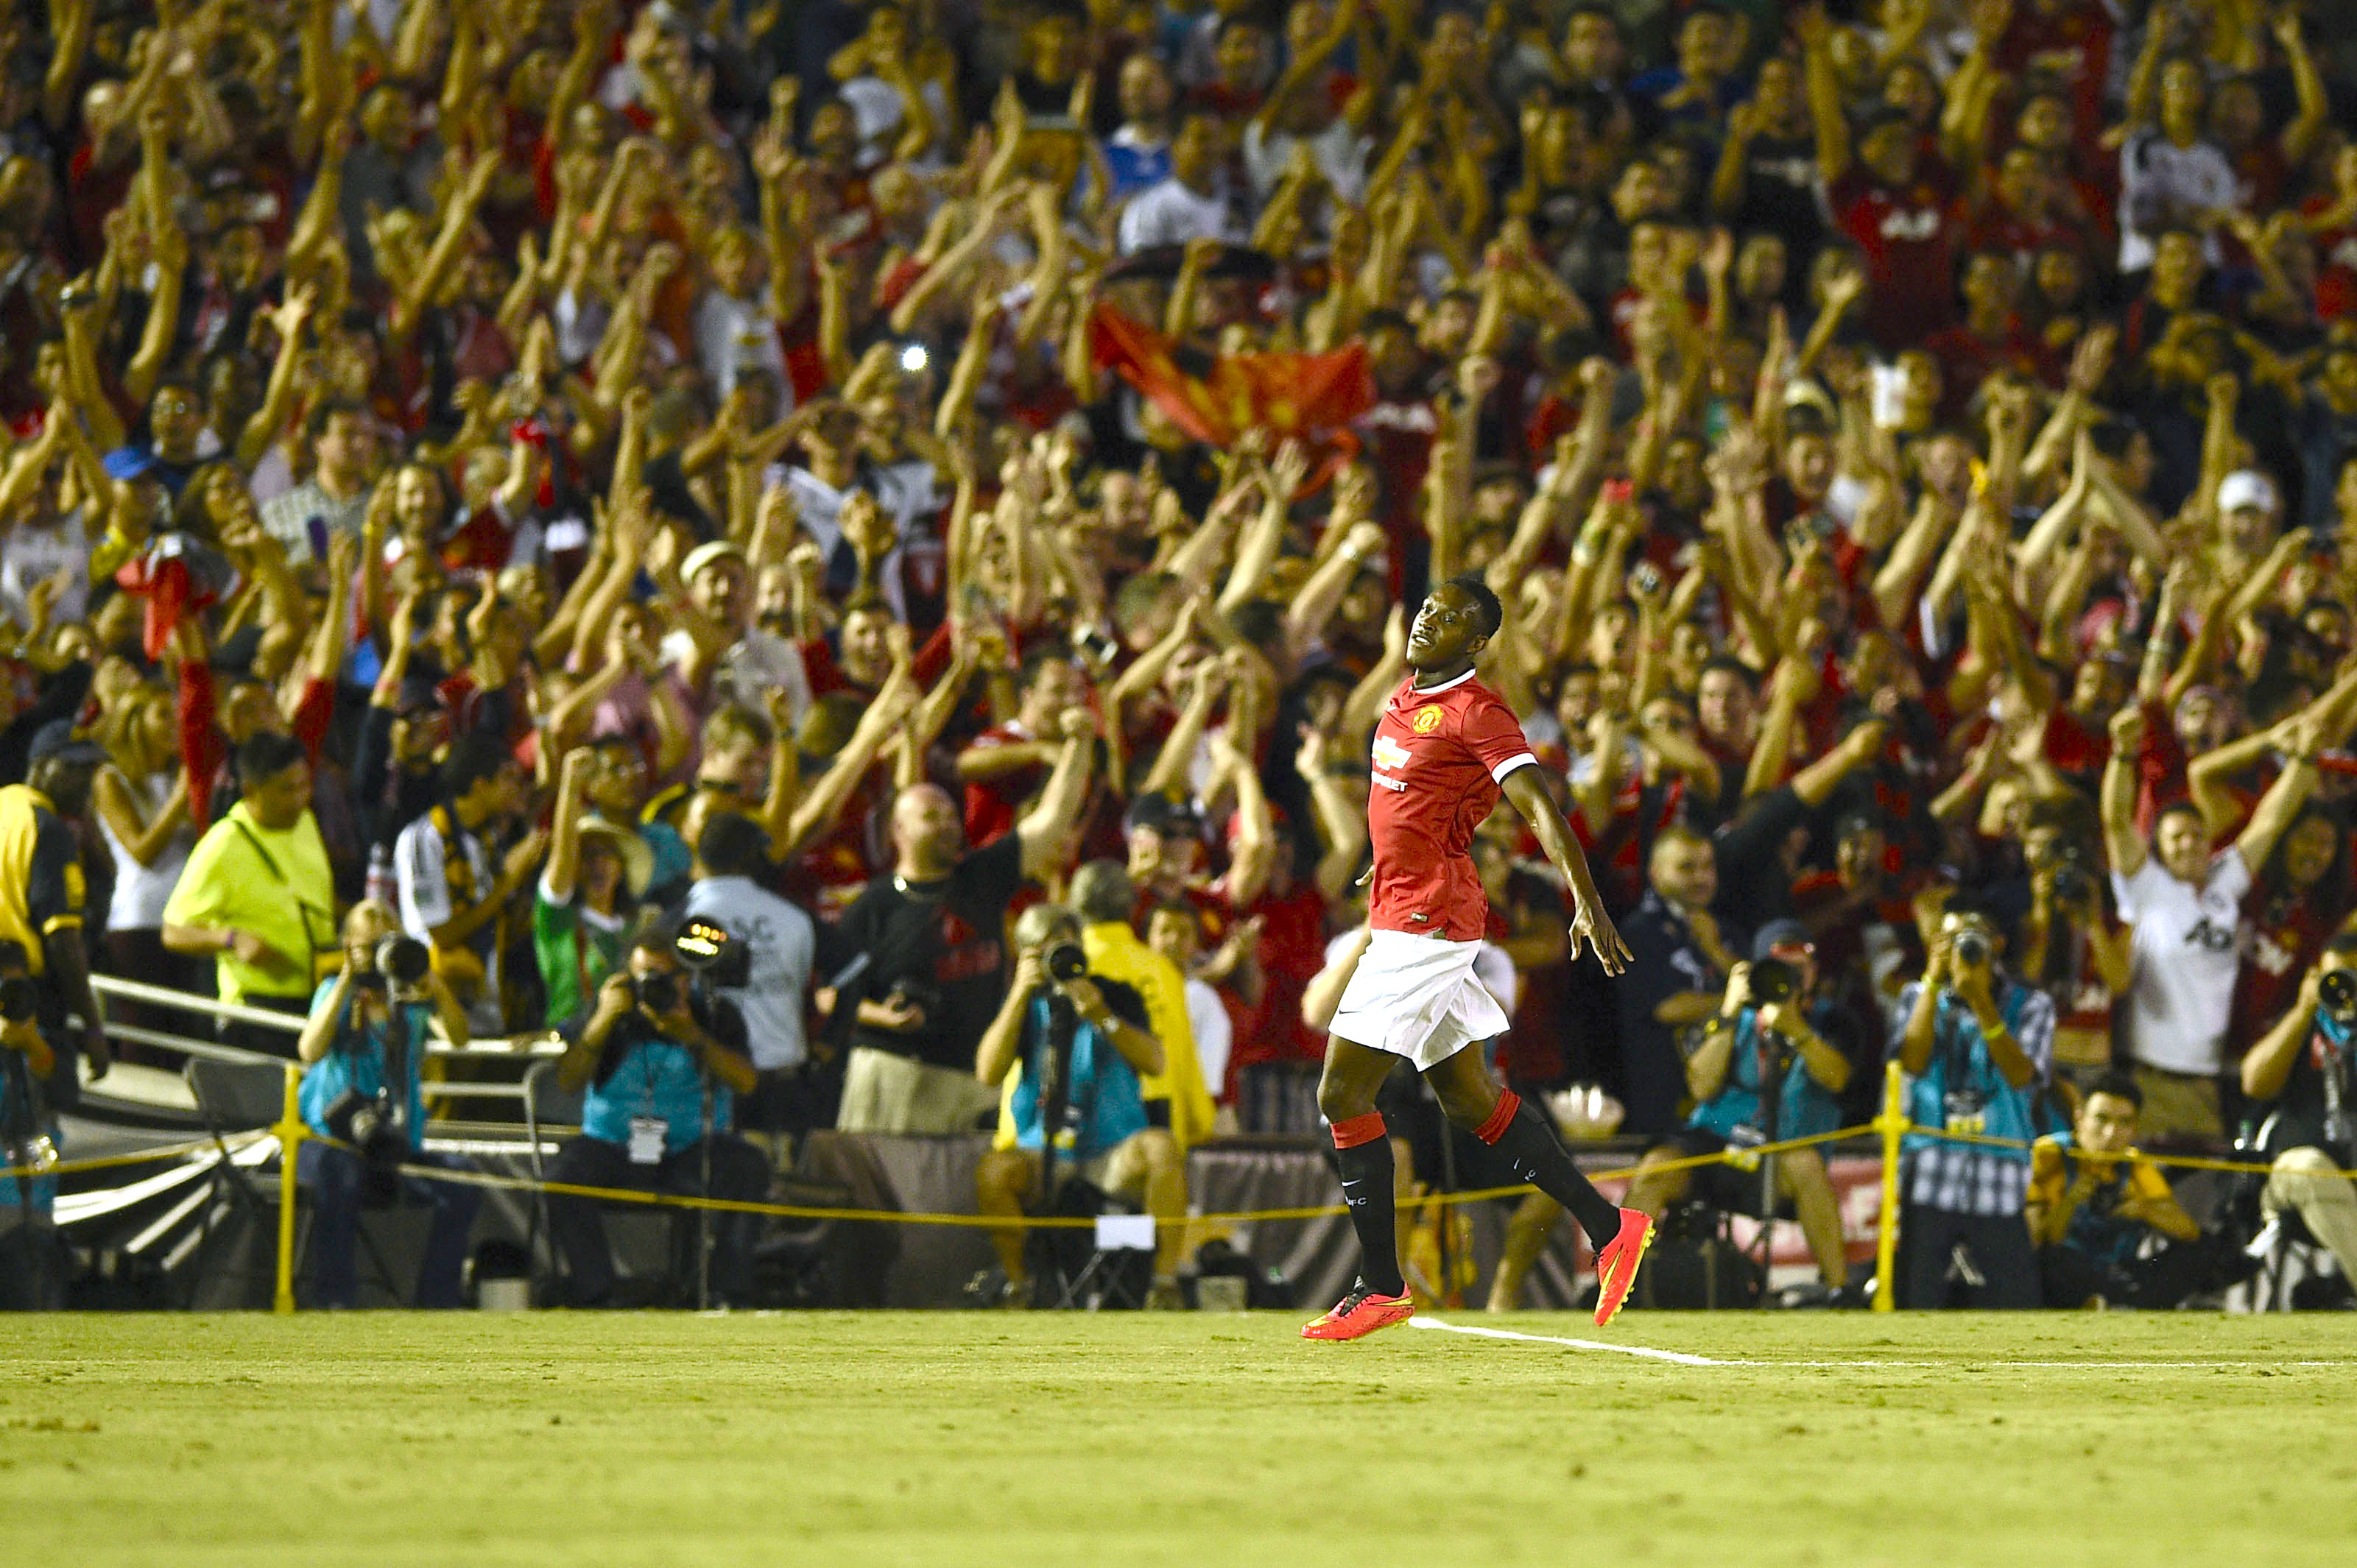 Jul 23, 2014; Pasadena, CA, USA; Manchester United forward Danny Welbeck (19) celebrates after scoring a goal against the Los Angeles Galaxy during the first half at Rose Bowl. Mandatory Credit: Kelvin Kuo-USA TODAY Sports